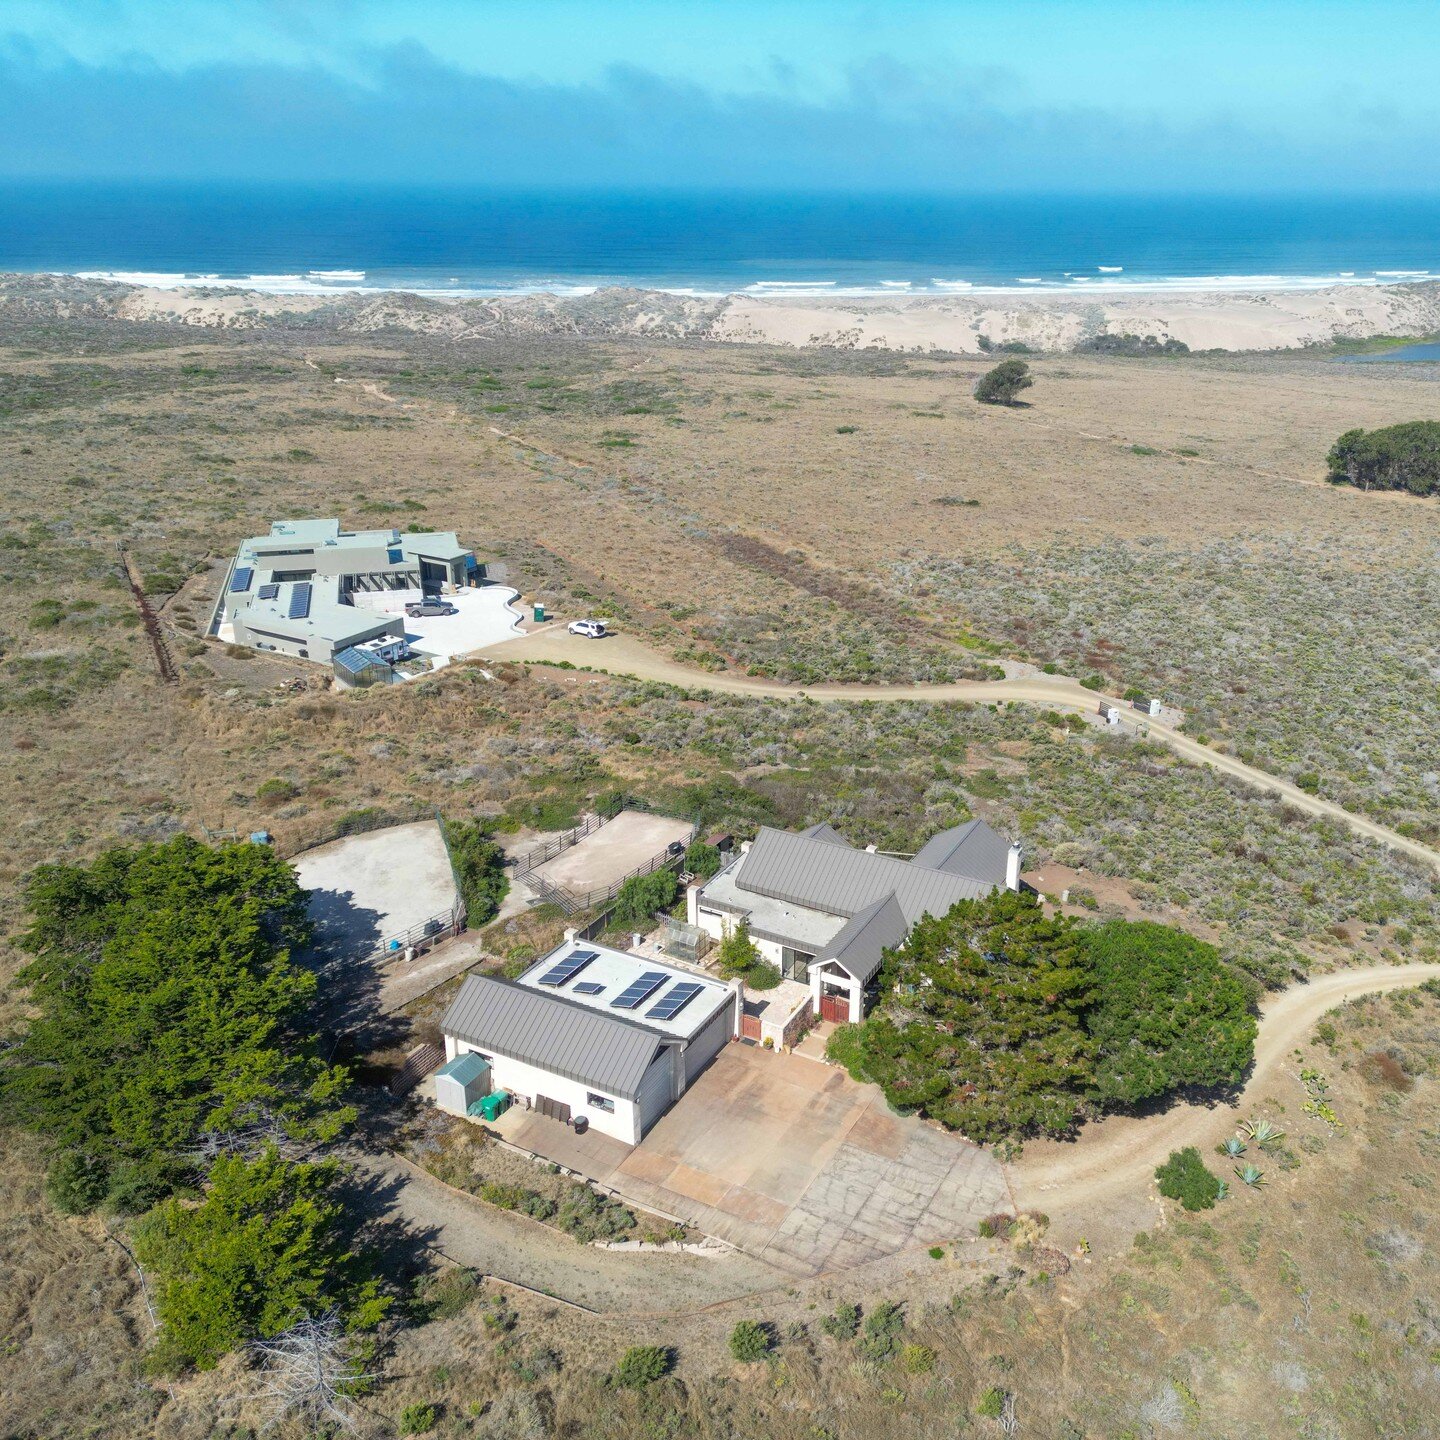 101 Seascape Place | Los Osos, CA 93402

Exceptional California Central Coast property with views of several hundred acres of coastal chaparral, sand dunes and eucalyptus grove plus panoramic ocean views. This one-of-a-kind property abuts Montana de 